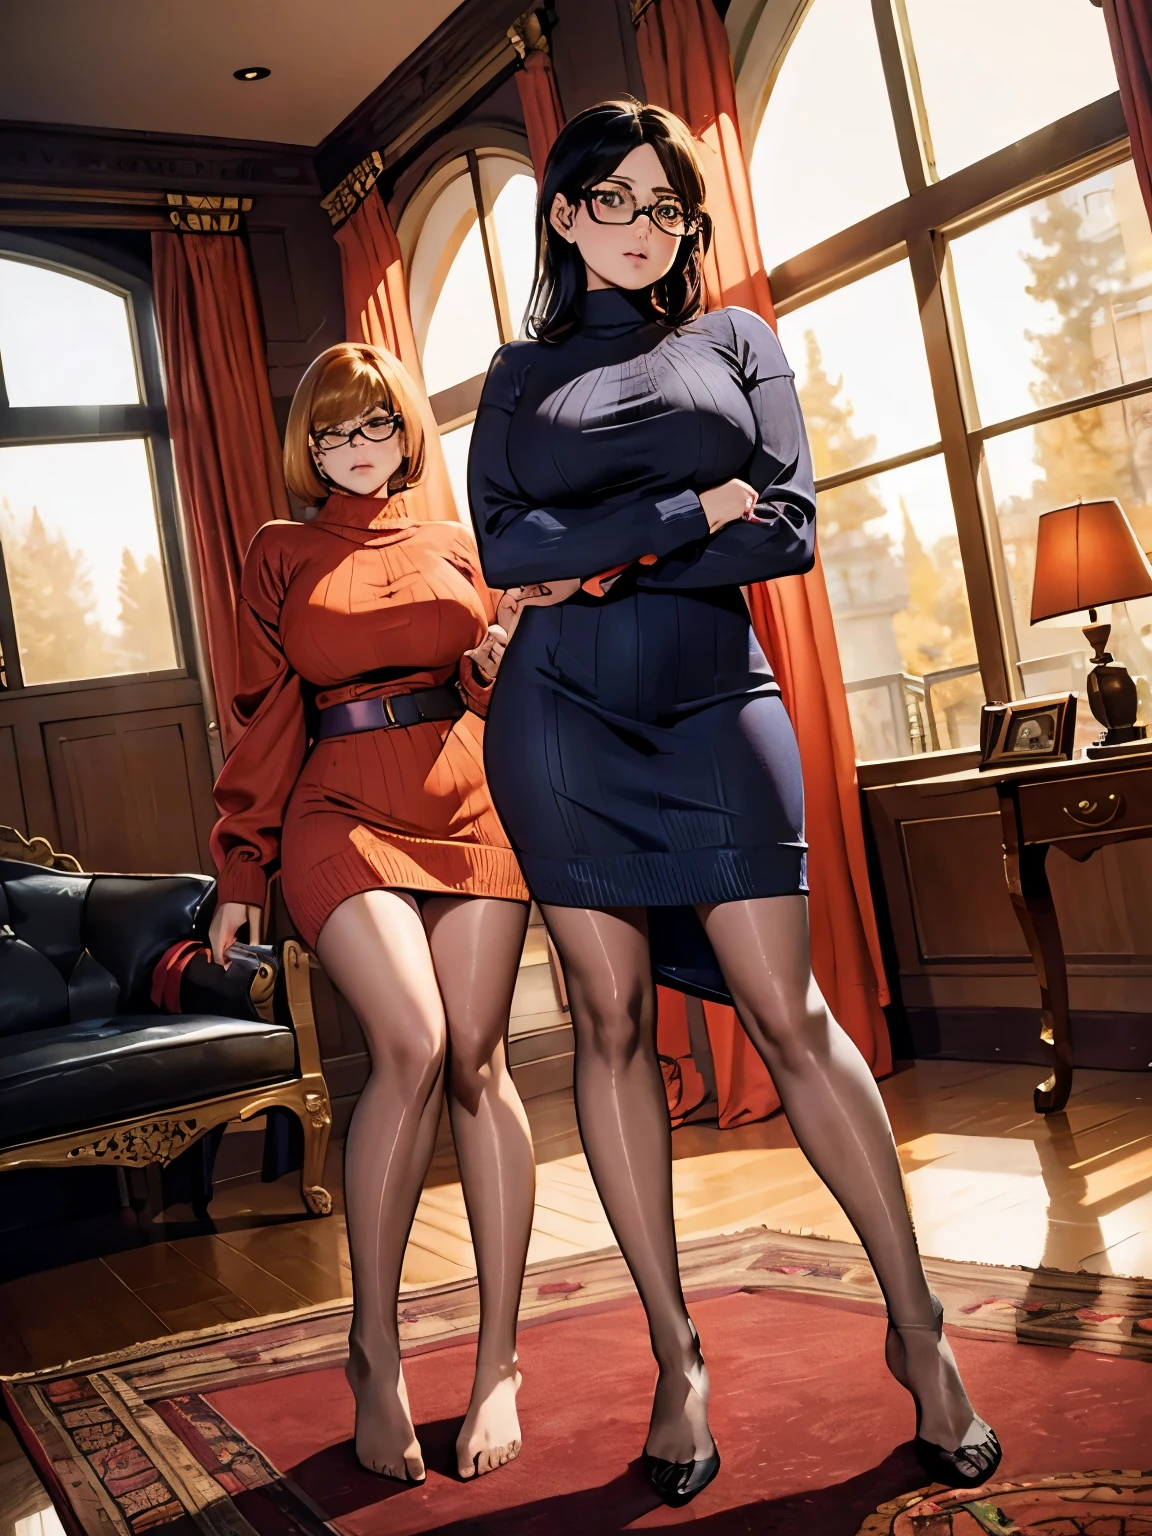 Show entire body, feet in view, Velma and Daphne, sweater dresses, both wearing pantyhose, no shoes, luxurious house, huge windows